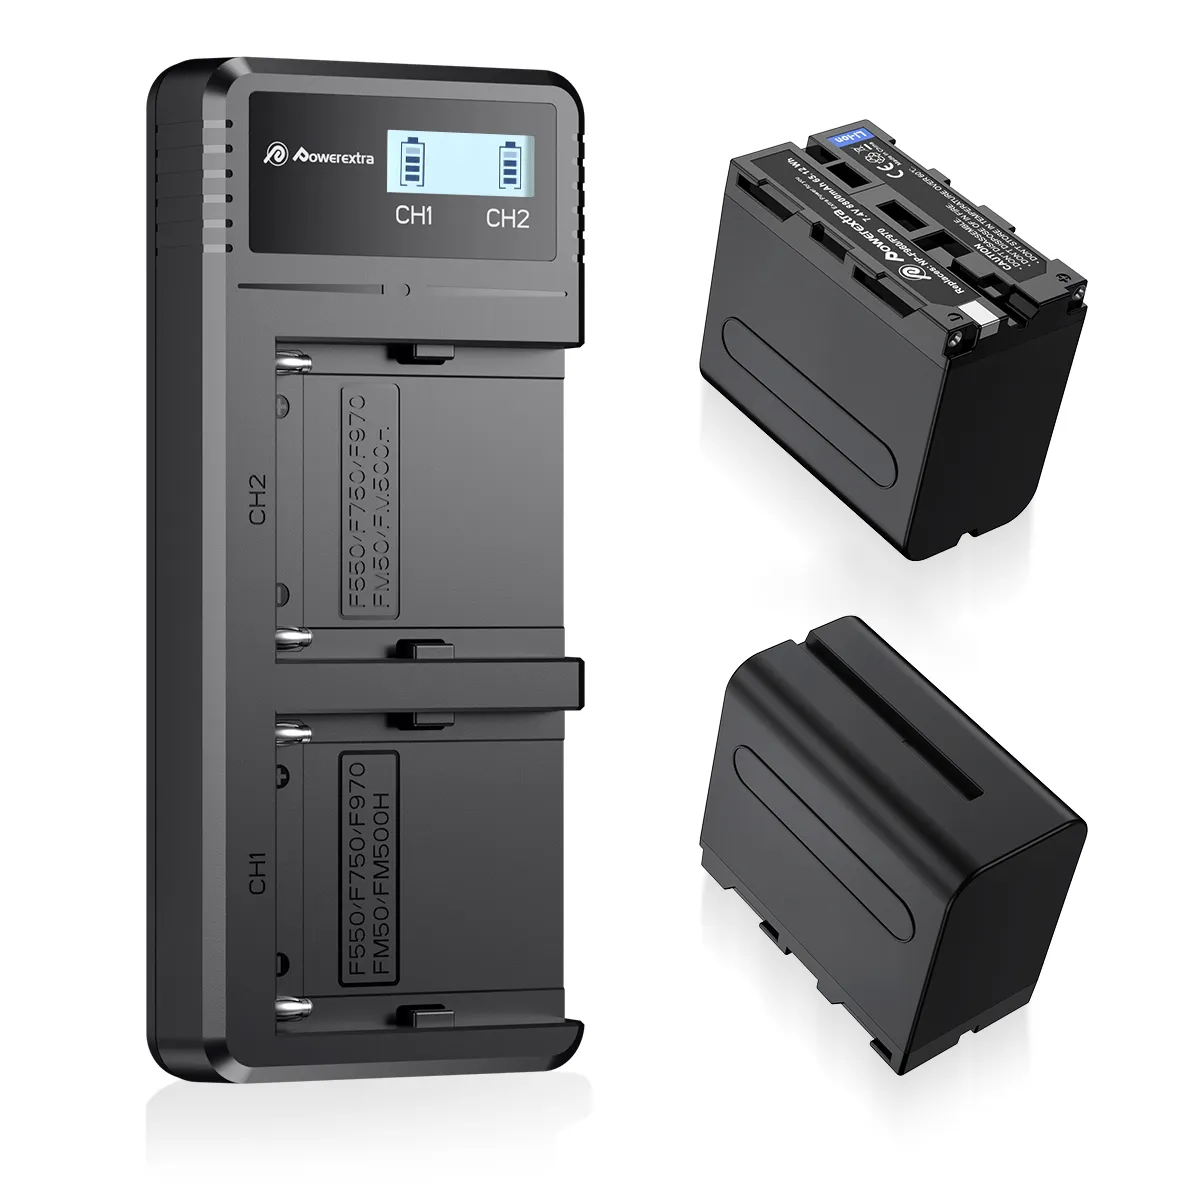 Li-ion Rechargeable 7.4V 8800mAh Digital Batteries Charger For Sony NP-F550 570 750 770 970 960 975